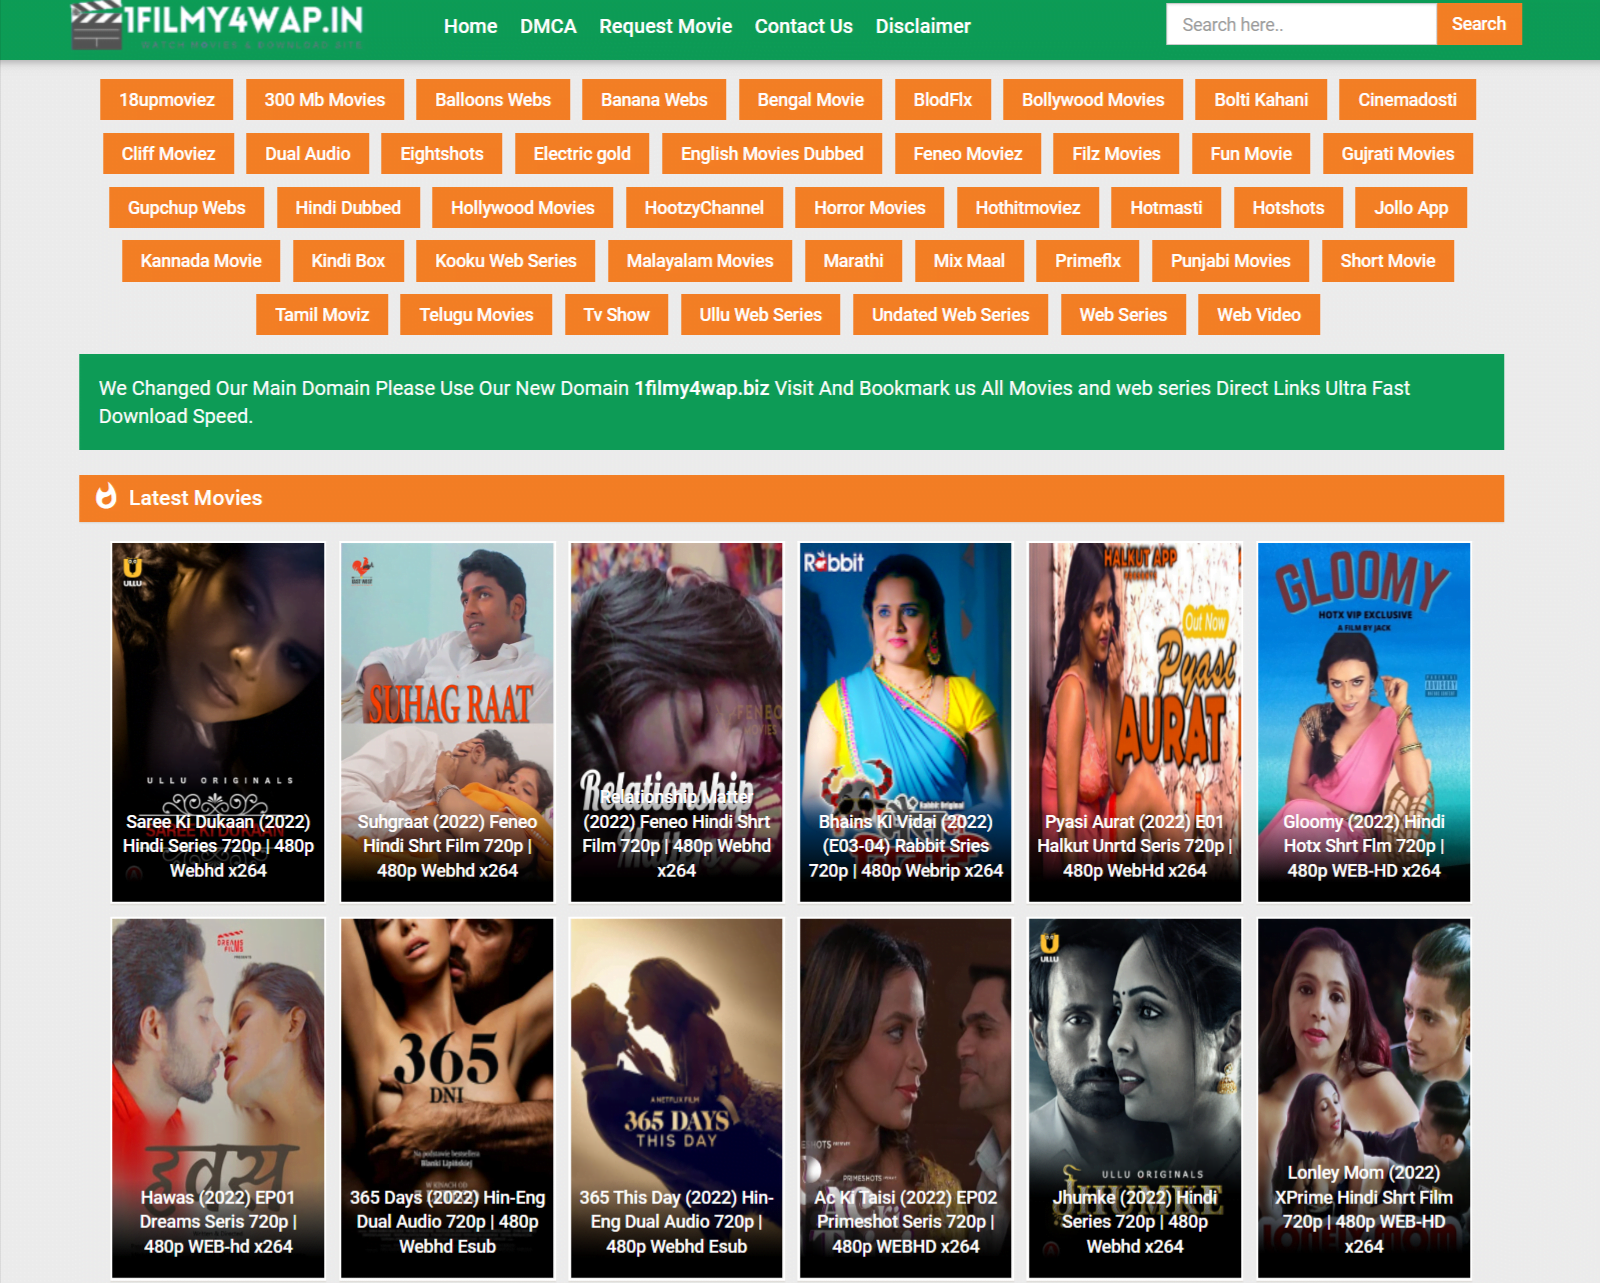 Filmy4wap.in website showcasing different movies and their posters